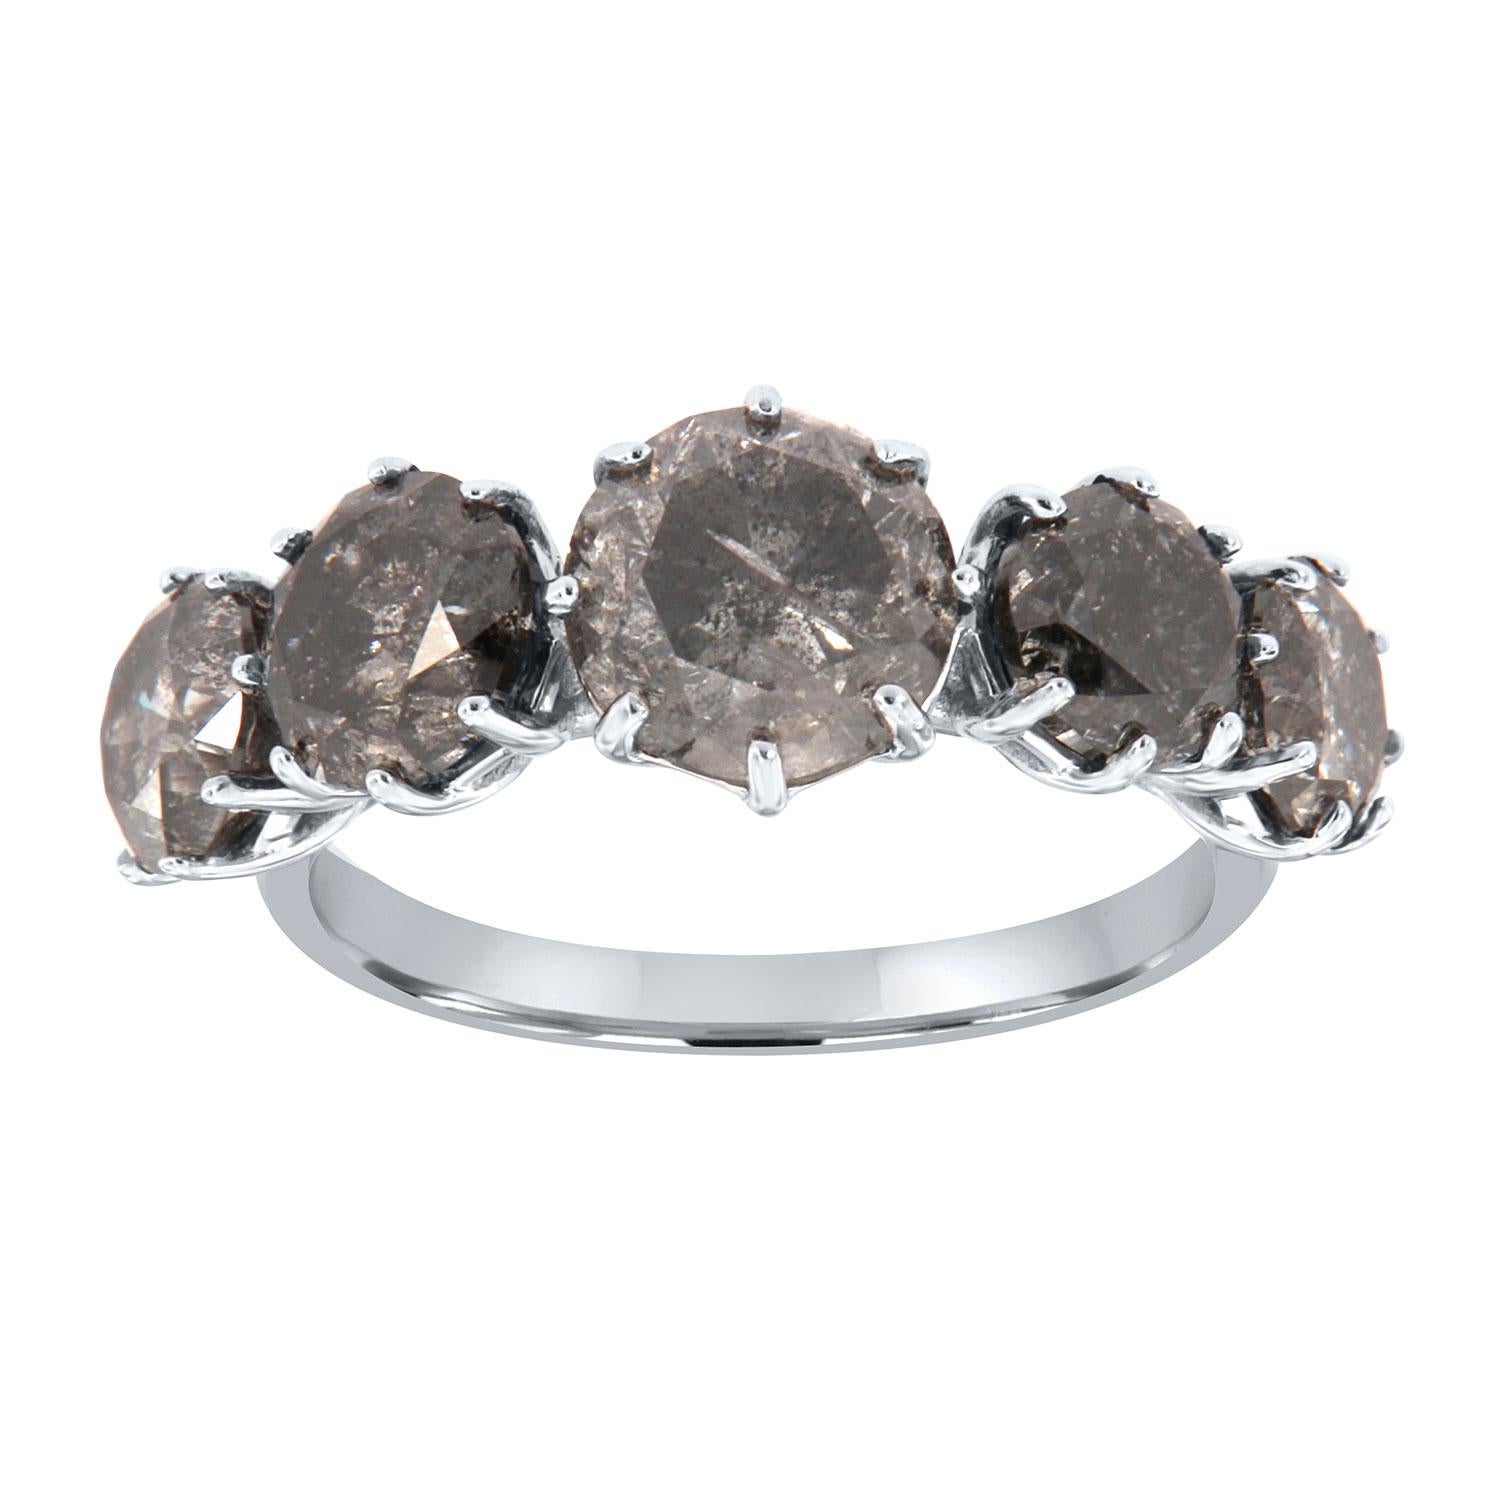 This 14k white gold rustic ring features five (5) Round shape Salt and Pepper diamonds set in delicate six (6) delicate prongs, each on a 1.8 mm wide hammered band.  
The total weight of the diamonds is 4.16 Carat. The center diaomnd is 1.54 carat.